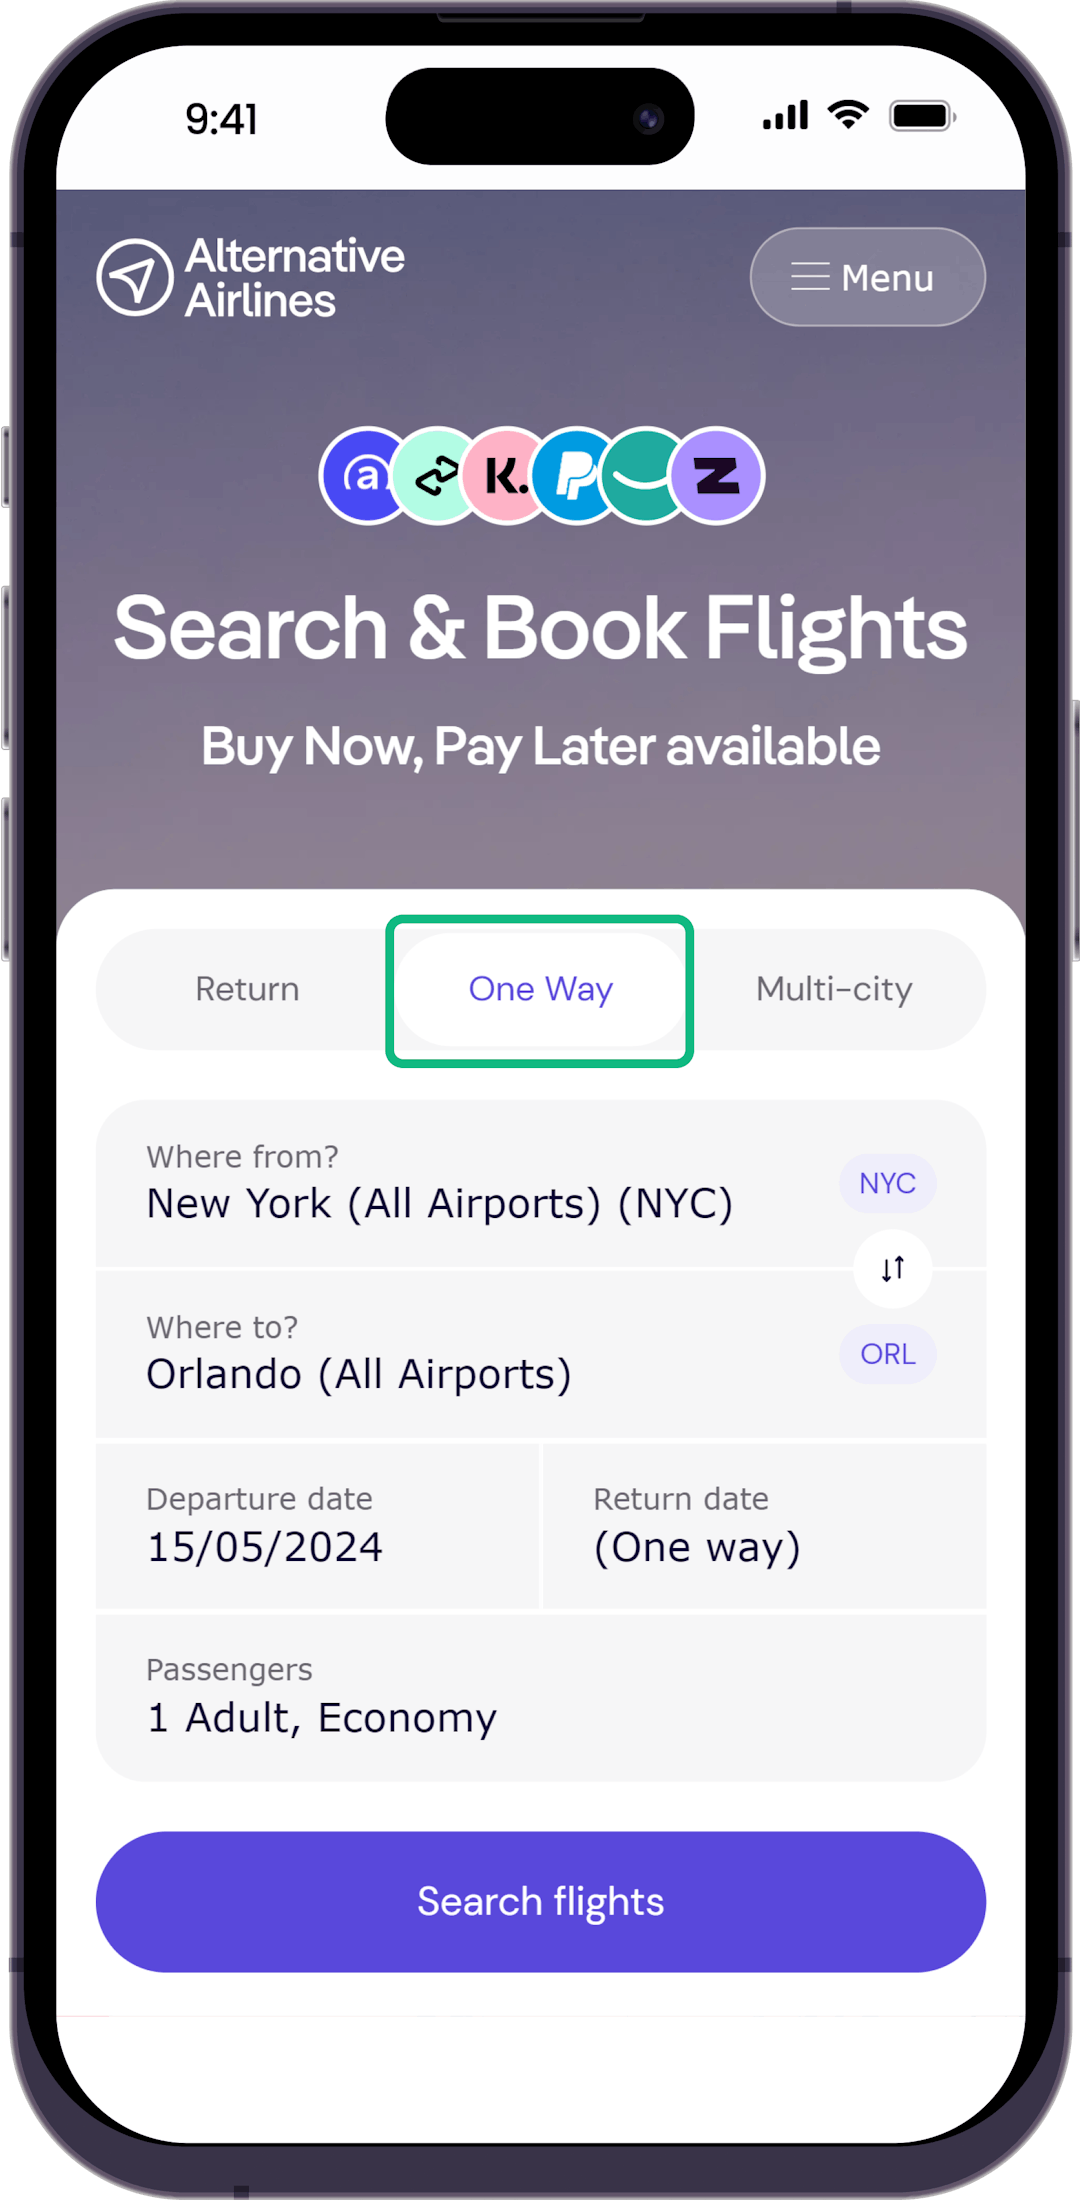 Step 1 - Select one-way option in search form